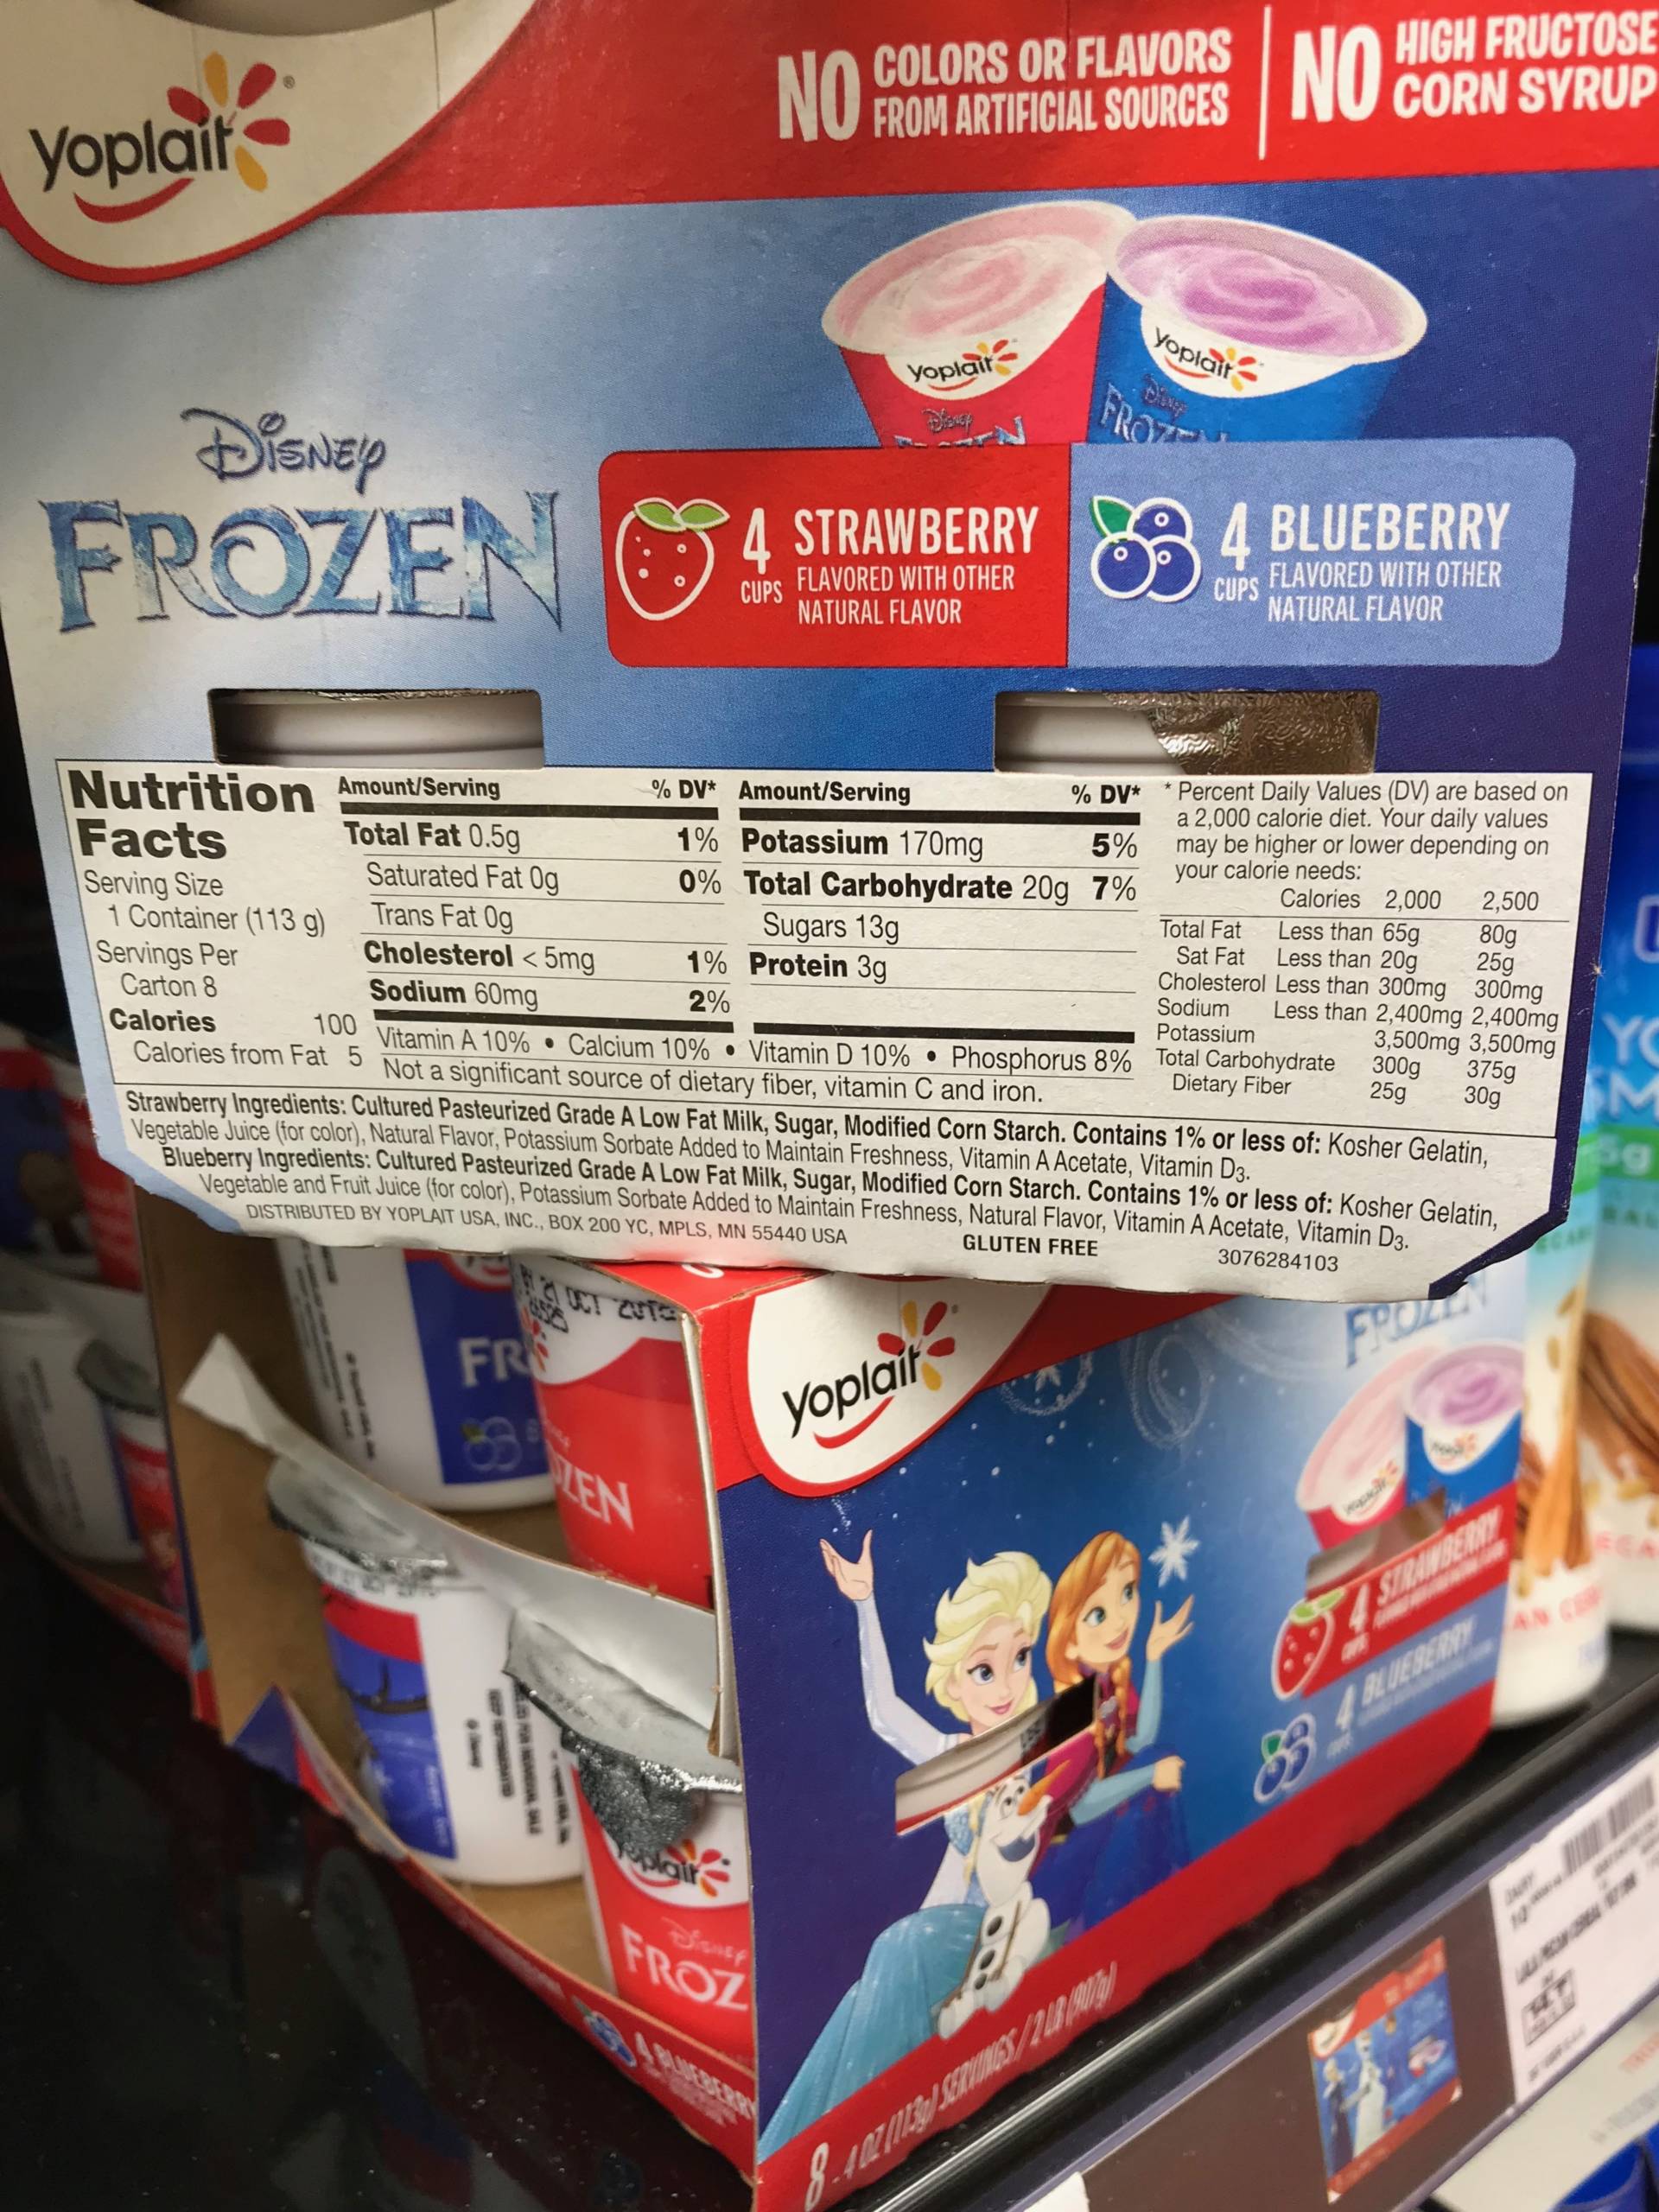 Yogurts found in a U.S. supermarket have similar amounts of sugar to those found in U.K. stores. And experts say those sugars can add up quickly.